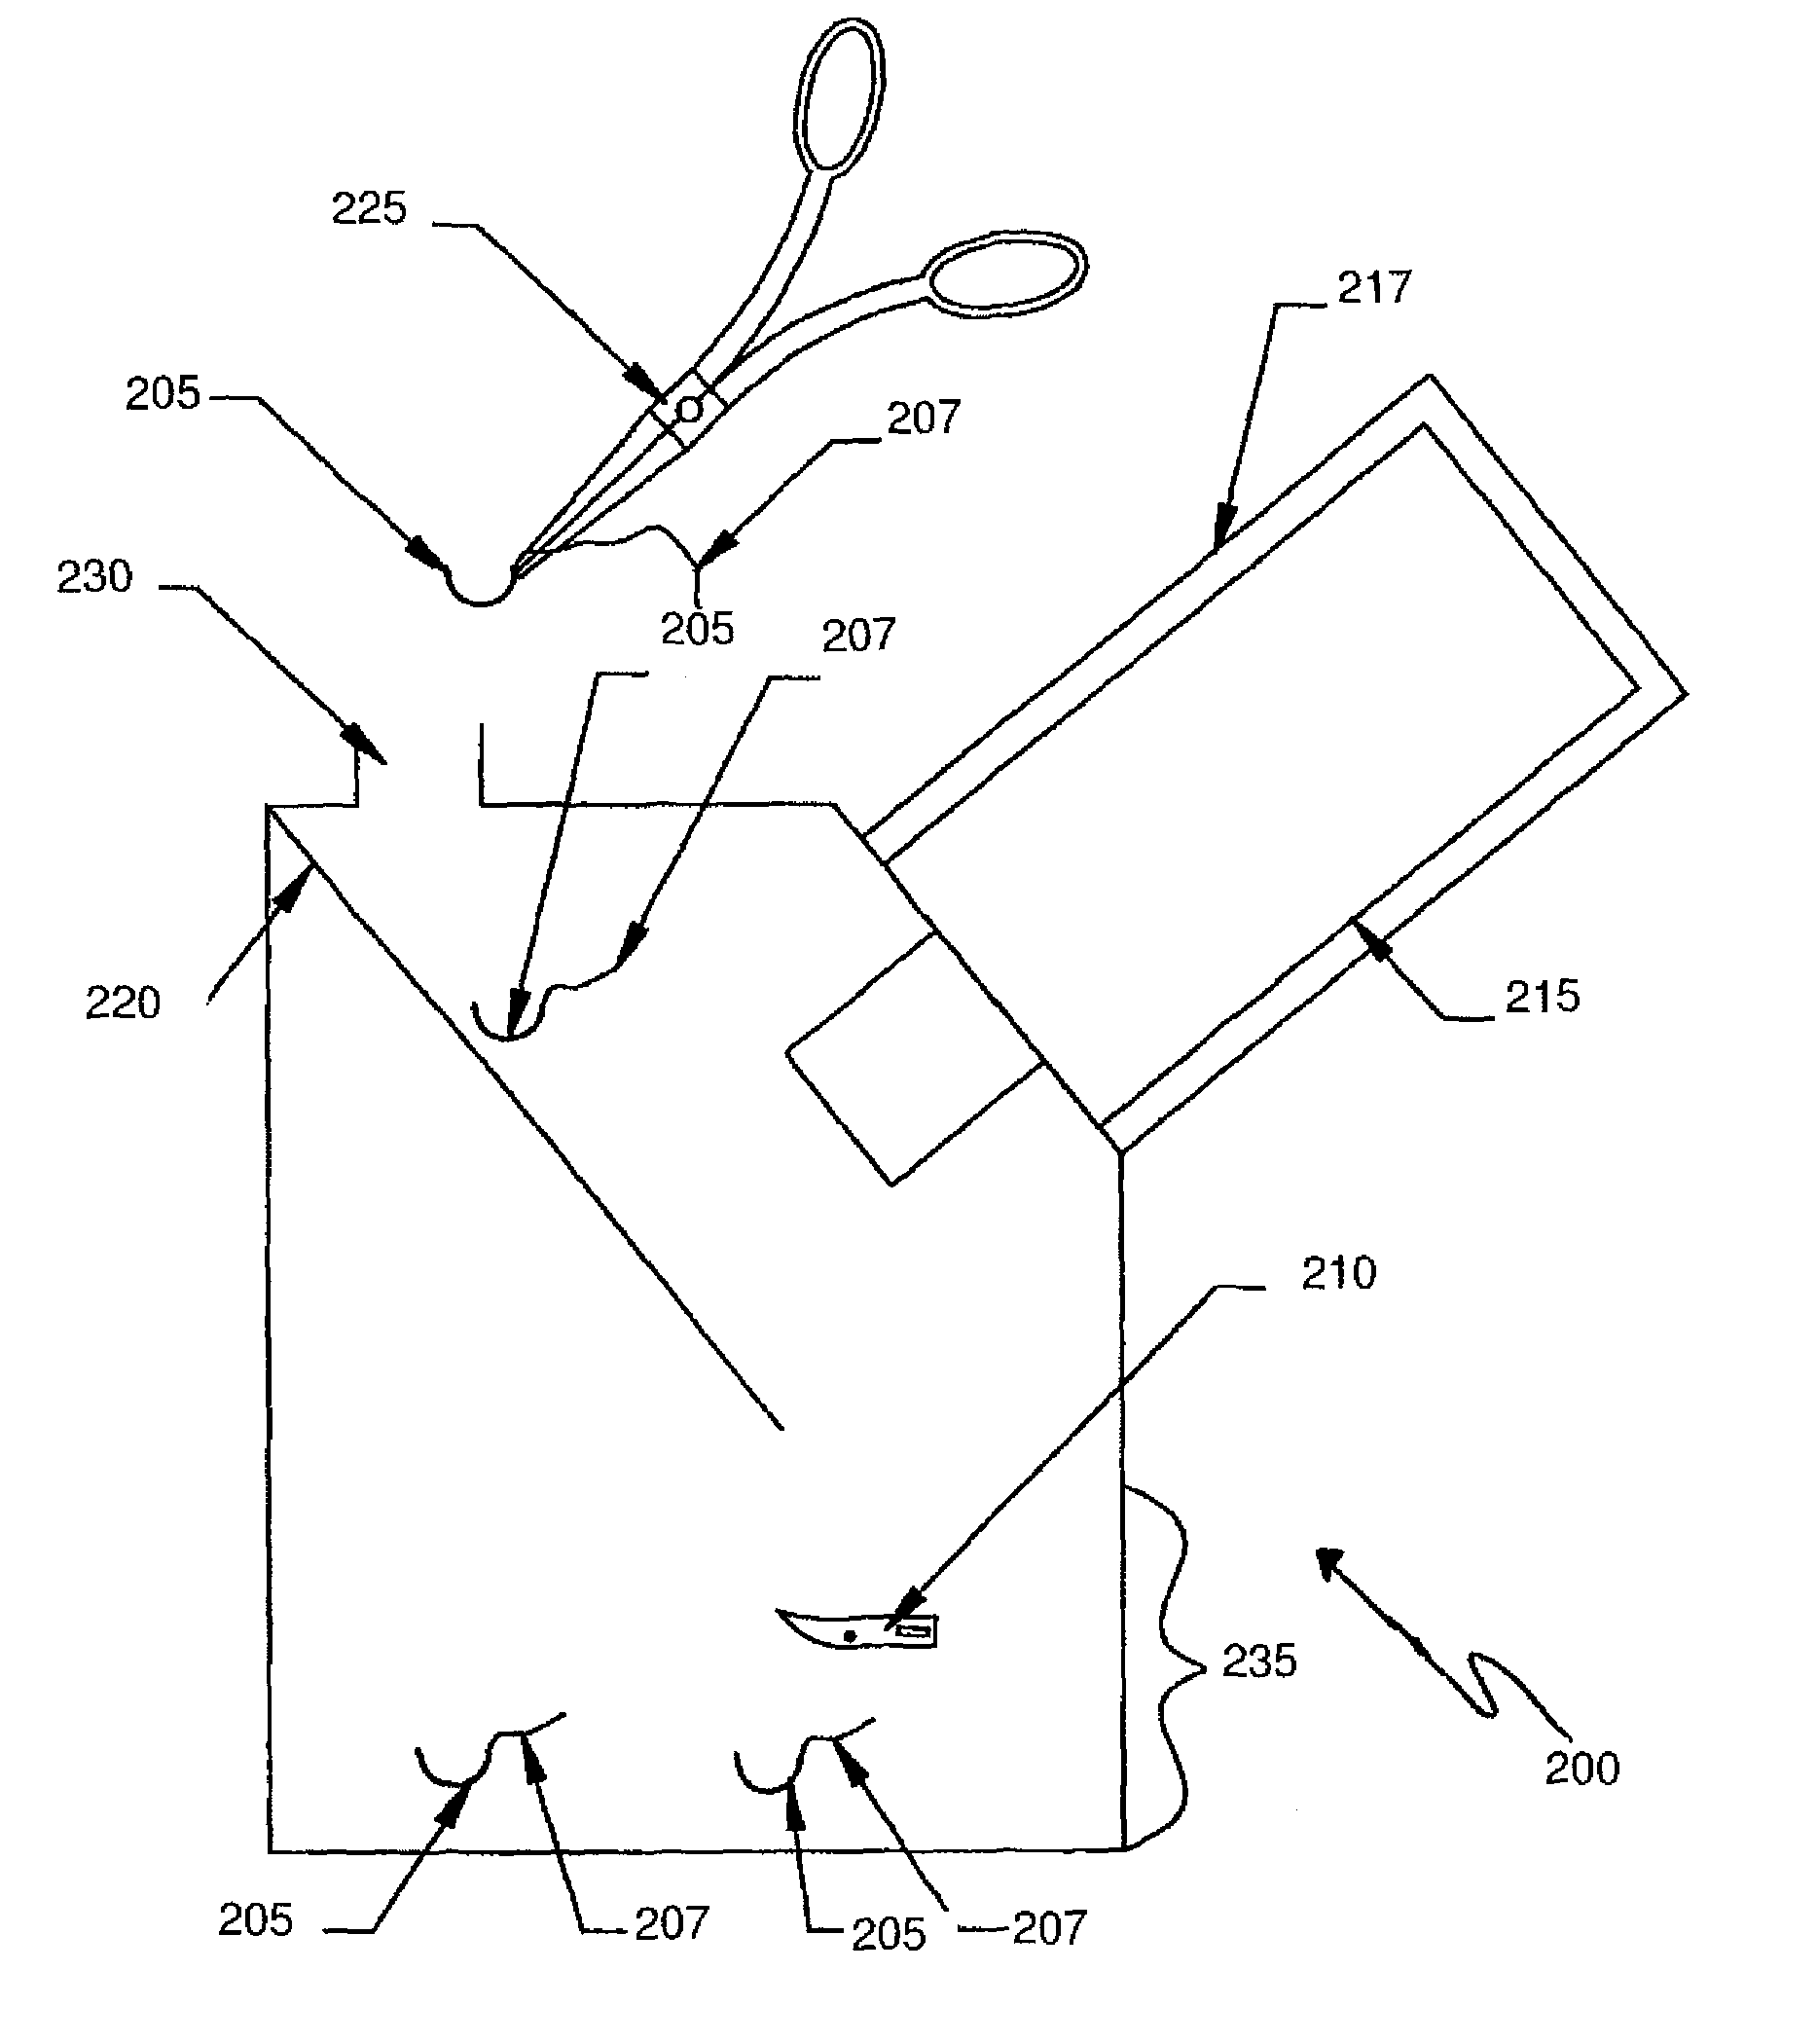 Intra-operative system for identifying and tracking surgical sharp objects, instruments, and sponges